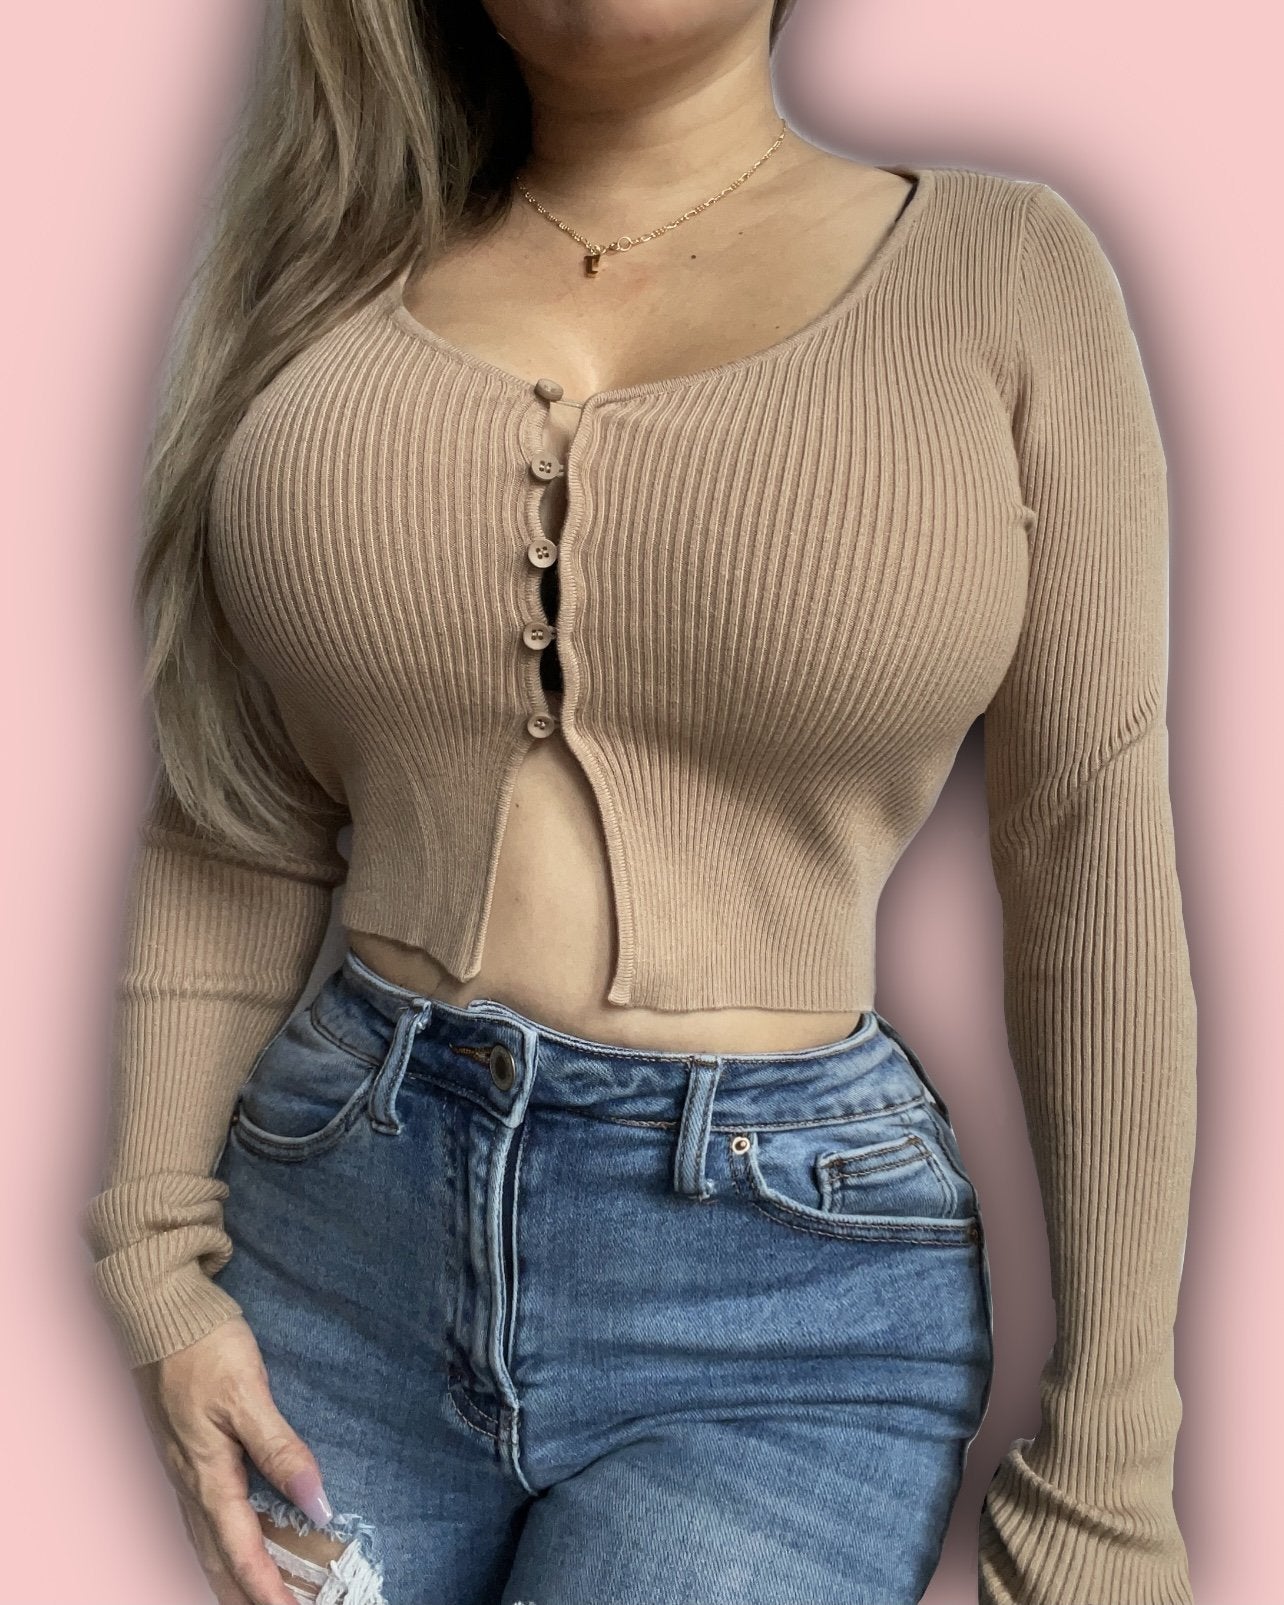 Karen Wants to Speak to a Manager Cardigan - SKYE KIYOMI BEAUTY, LLC#tops#bottoms#ootd#affordablefashion#affordablestyle#boutiqueshopping#sets#shortsets#pantsets#outerwear